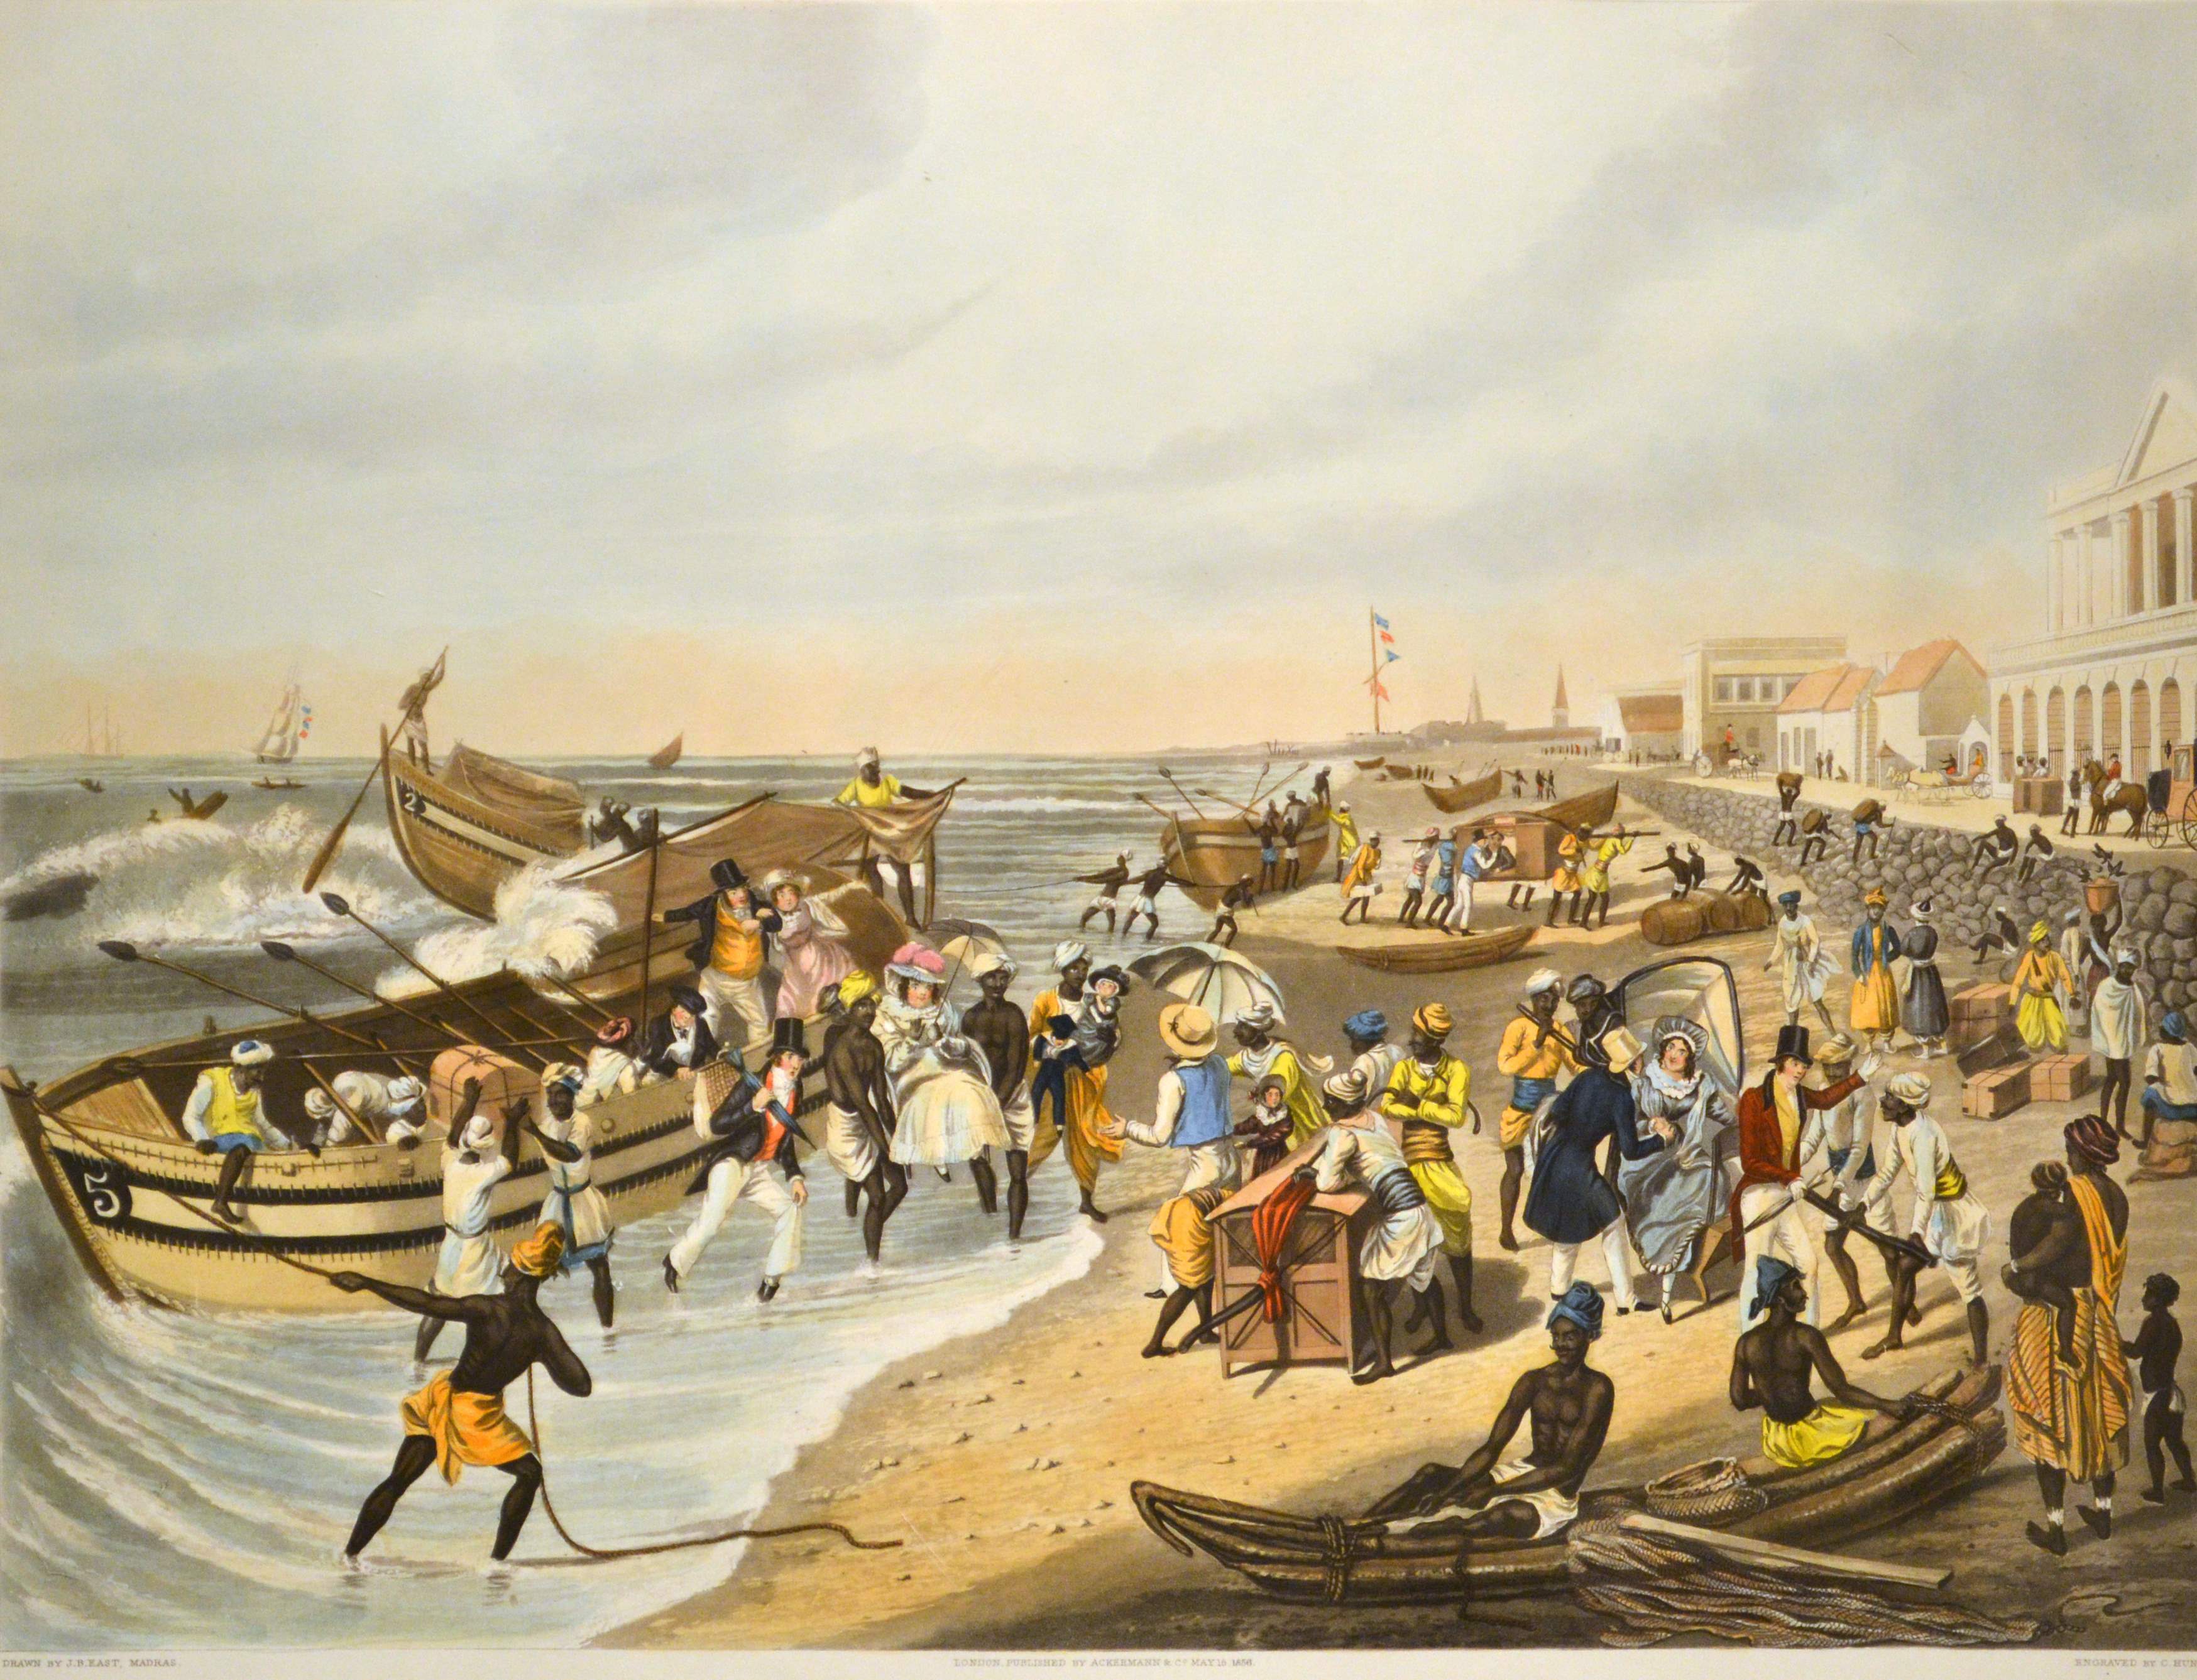 Painting of a crowd leaving a boat for shore with luggage. The scene shows Indians carrying luggage and white passengers